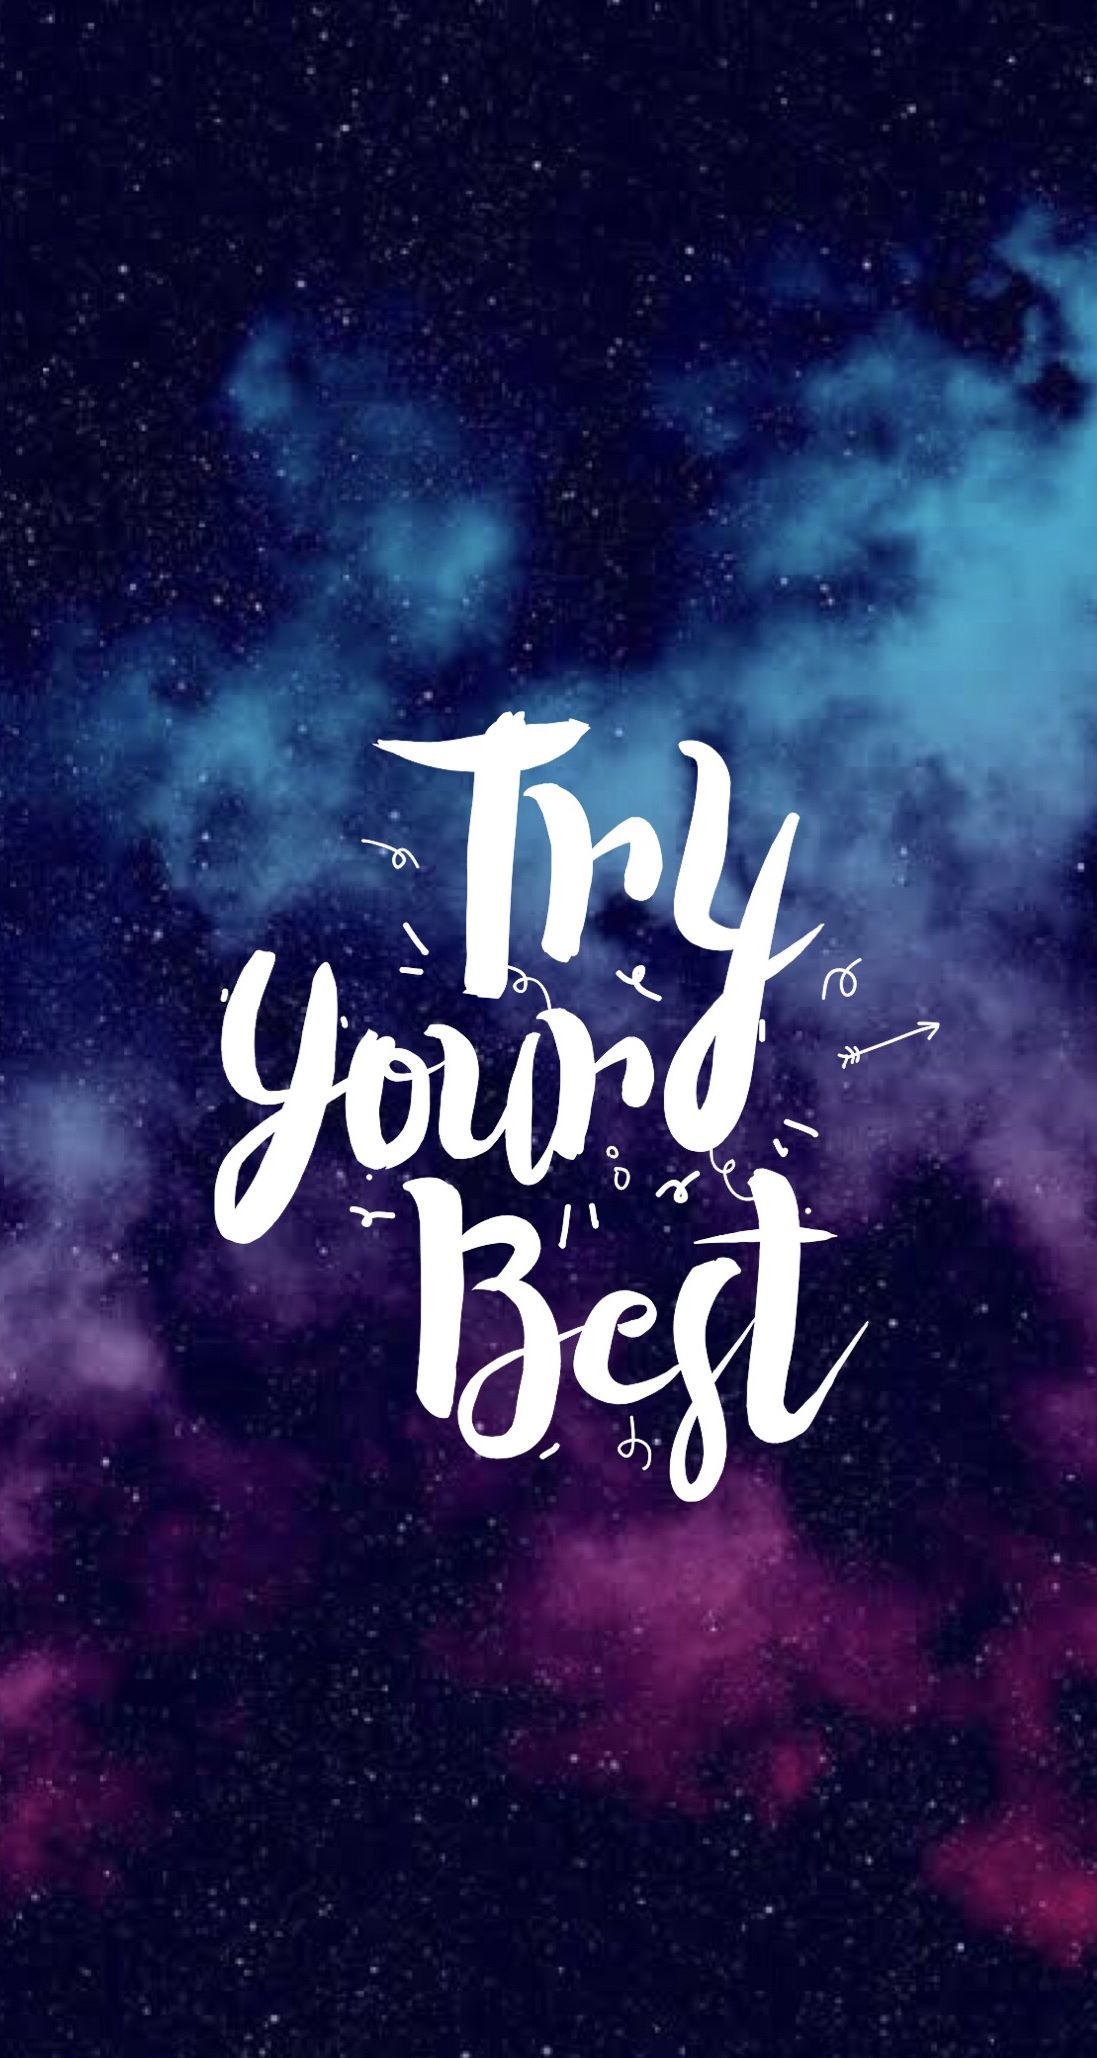 Try your best. Calligraphy wallpaper, Galaxy quotes, Quote background